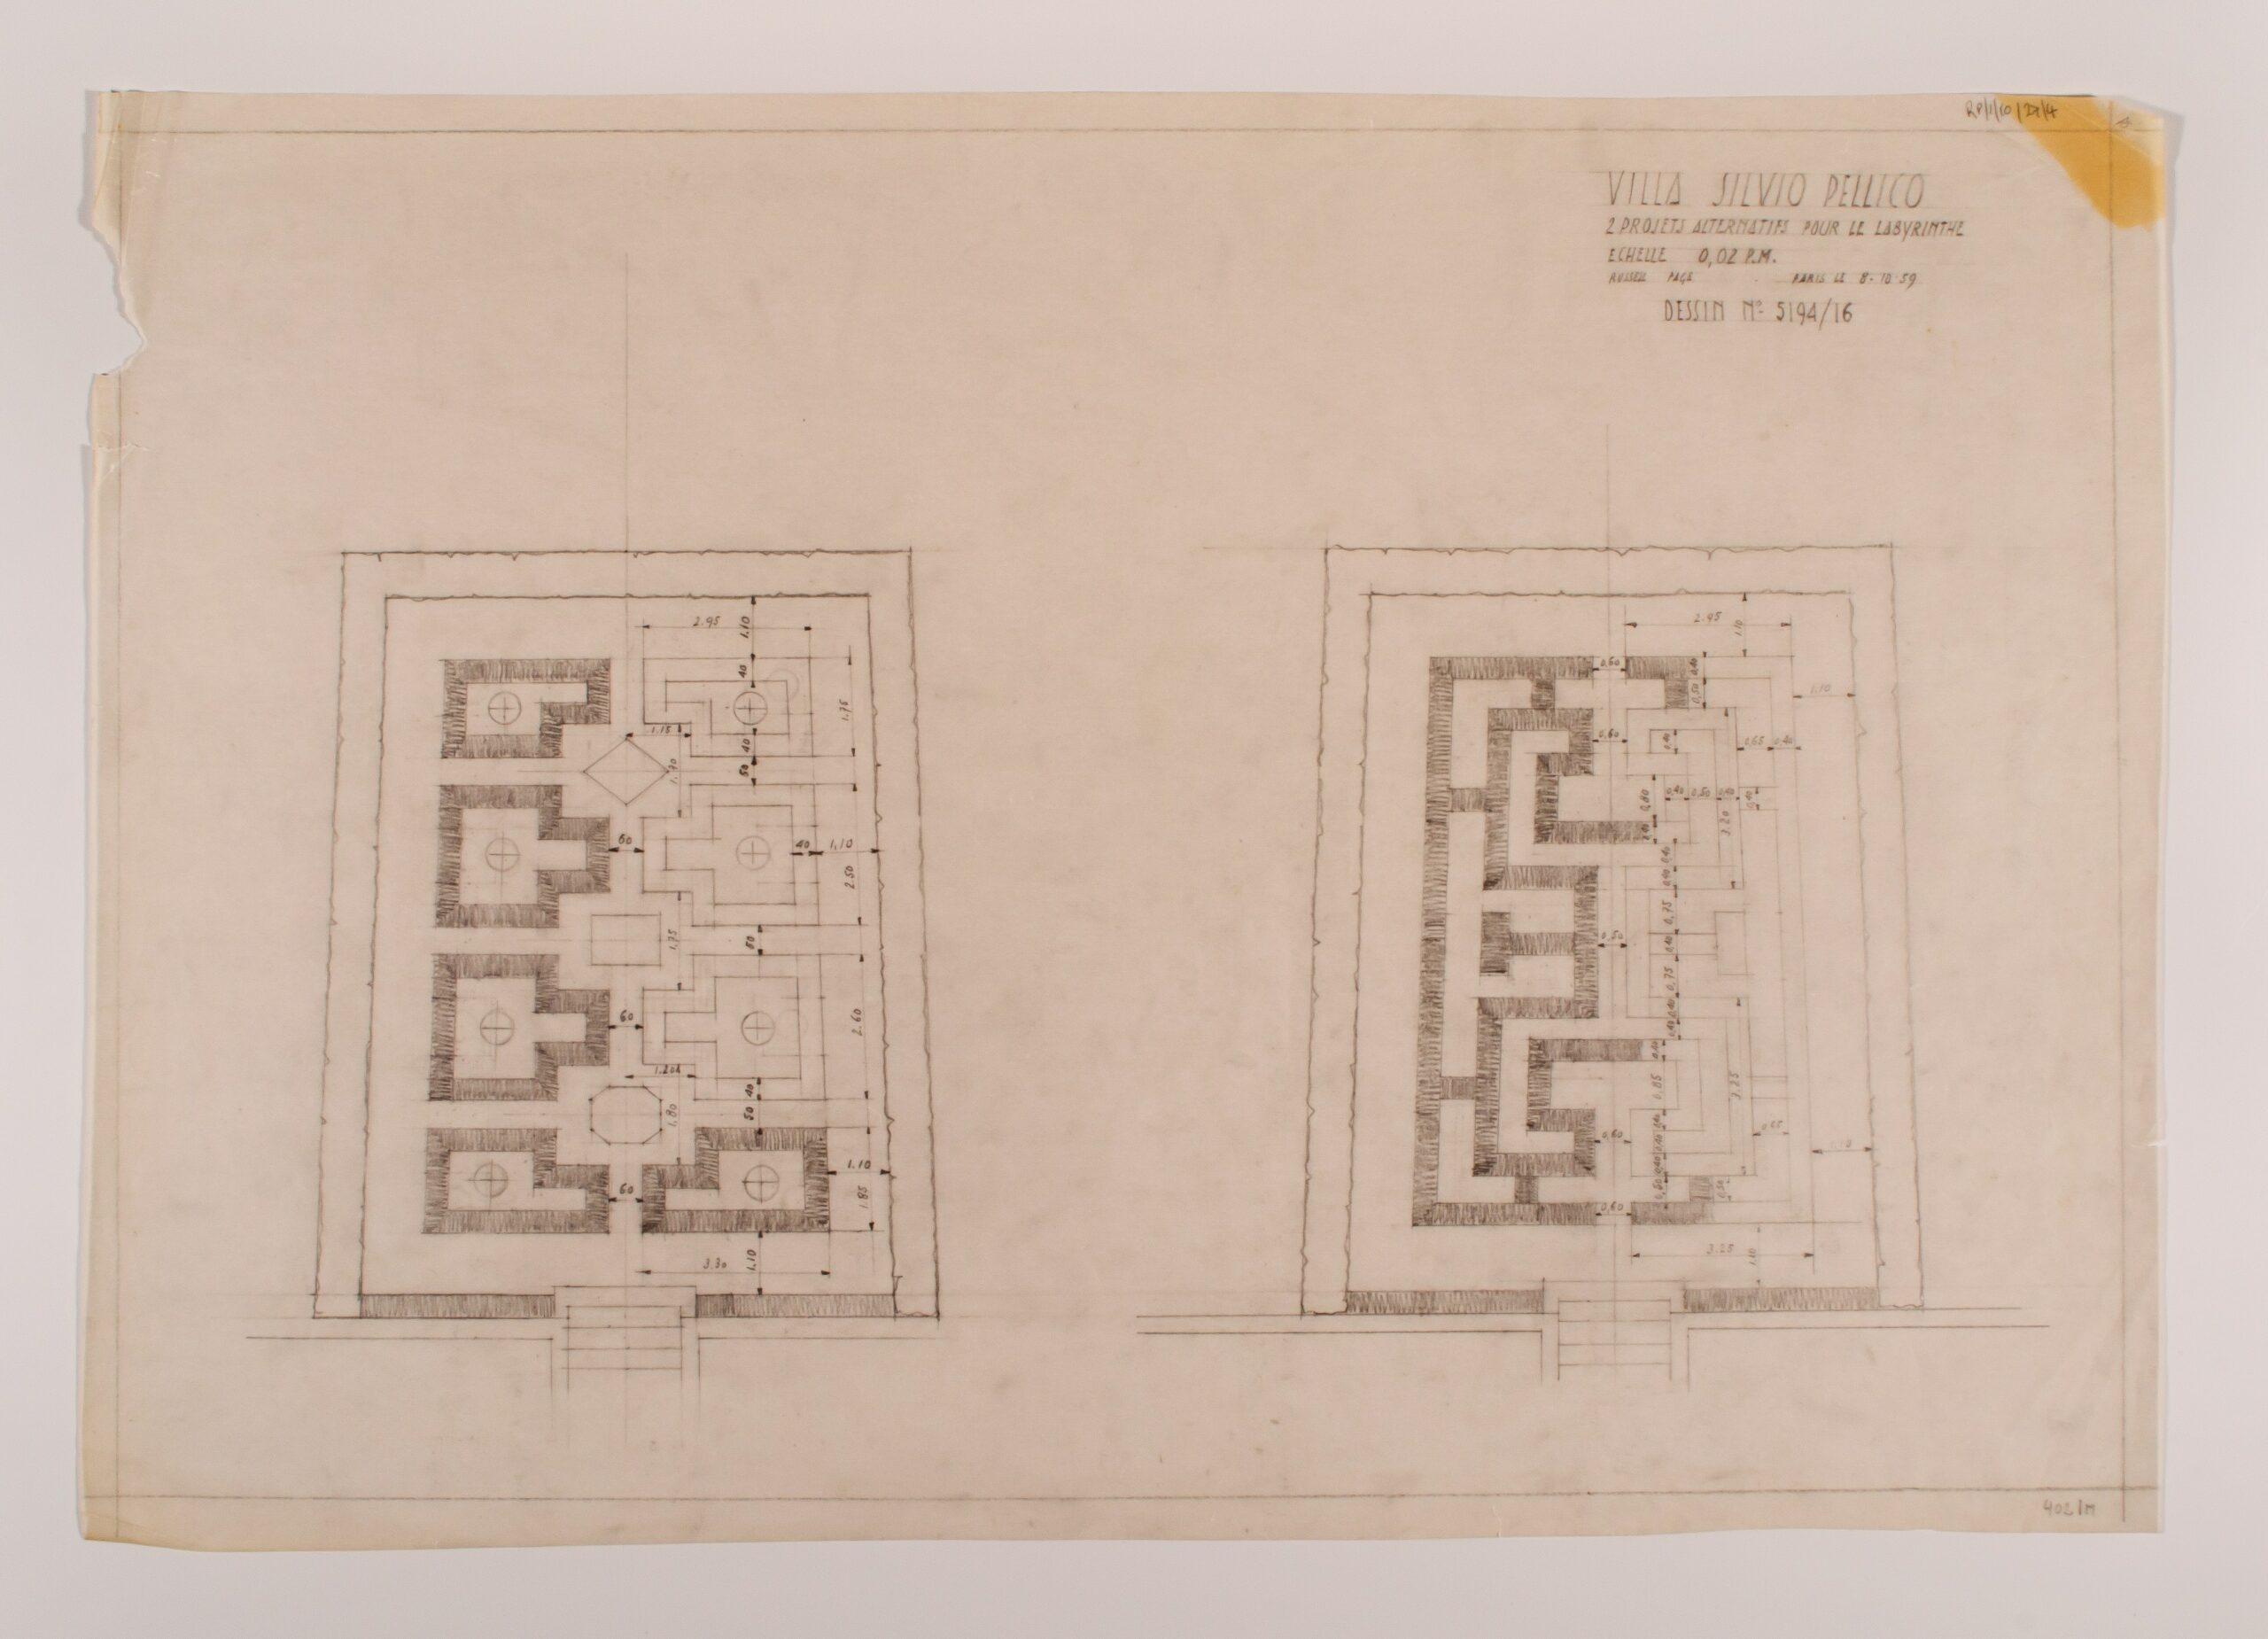 Russell Page, Project for the Labyrinth of Villa Silvio Pellico (October 8, 1959; pencil and colored pencil on paper, 500 x 735 mm; London, RHS Lindley Library)